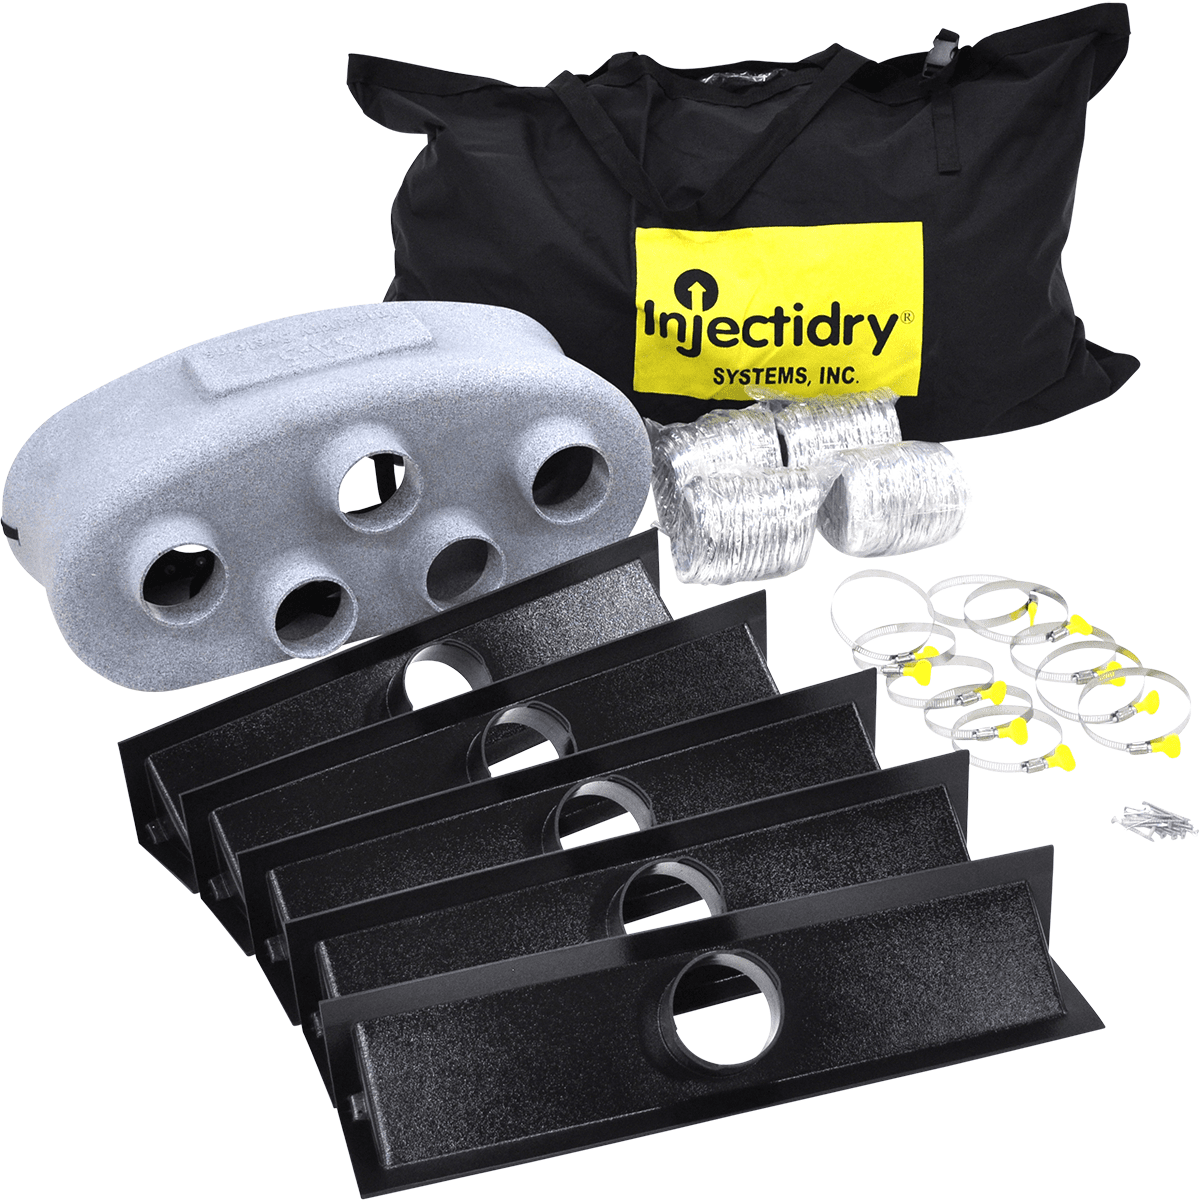 Injectidry Specialty Adapter 5 Port Package (sa-5-2)